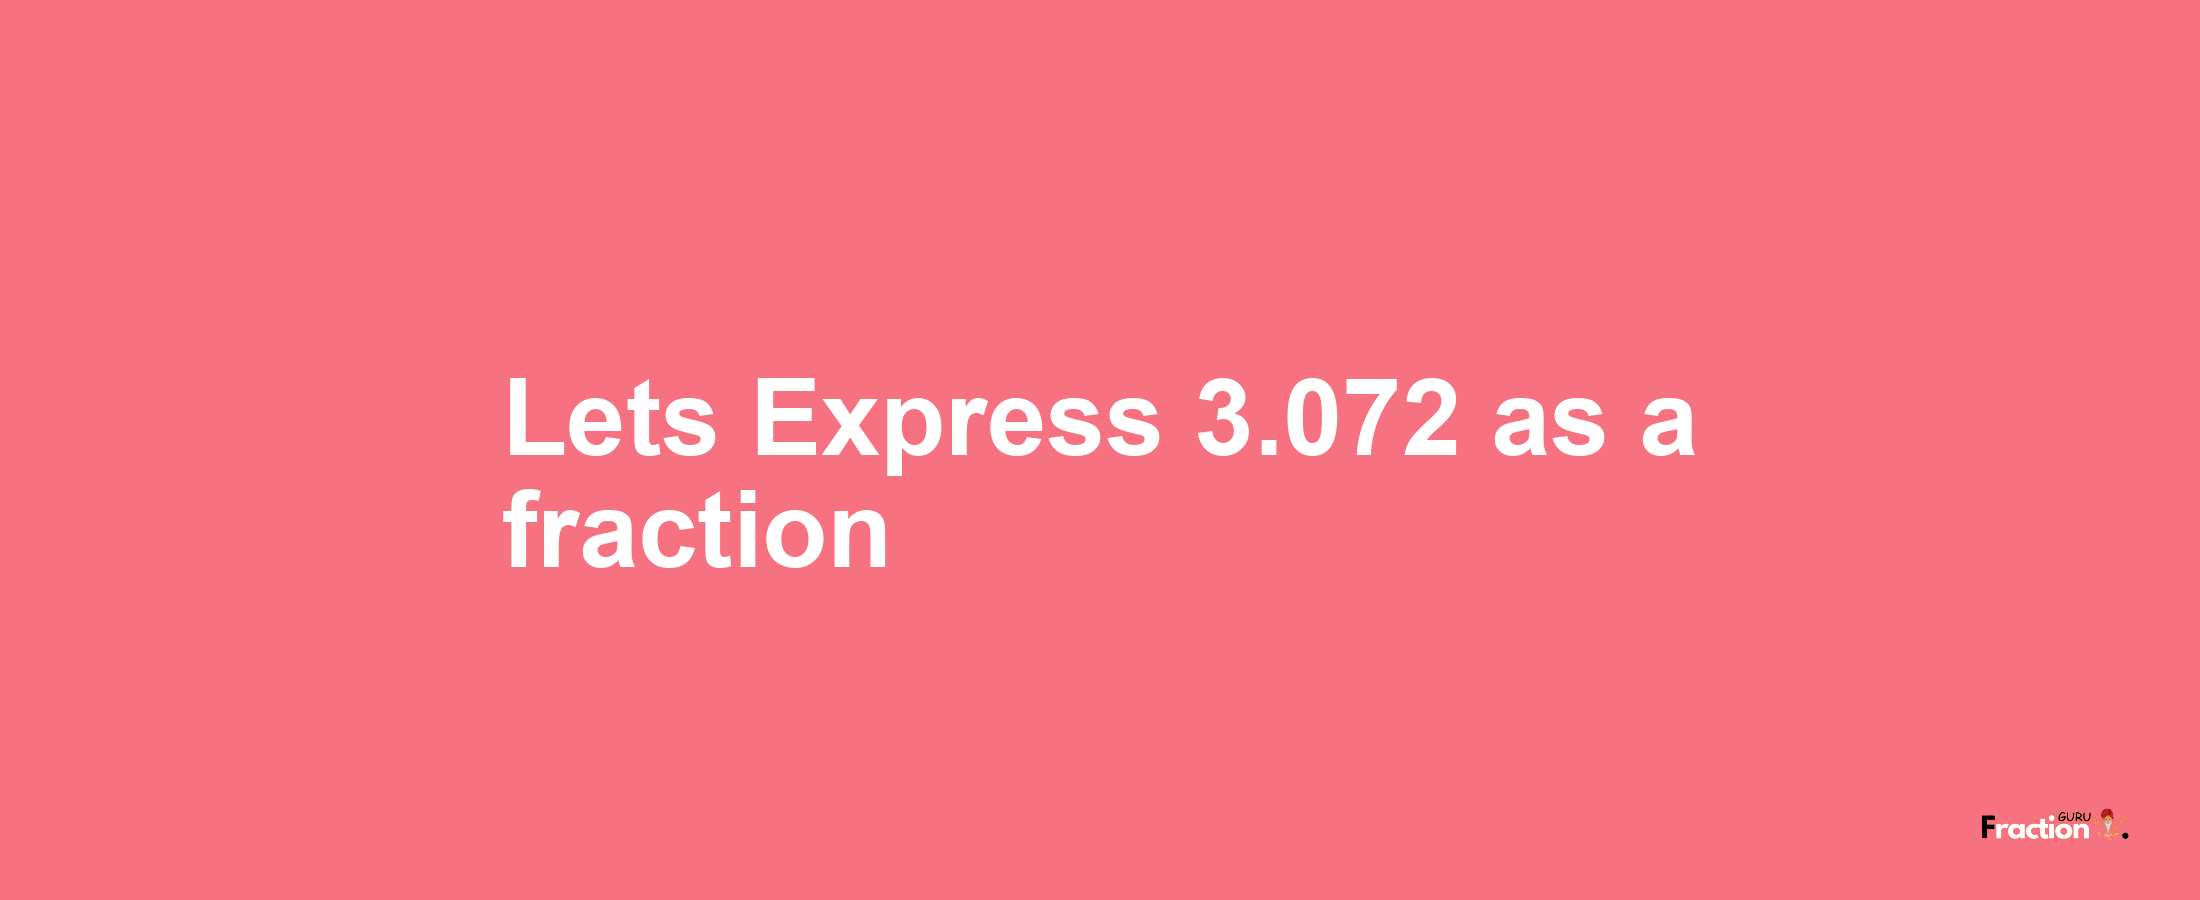 Lets Express 3.072 as afraction